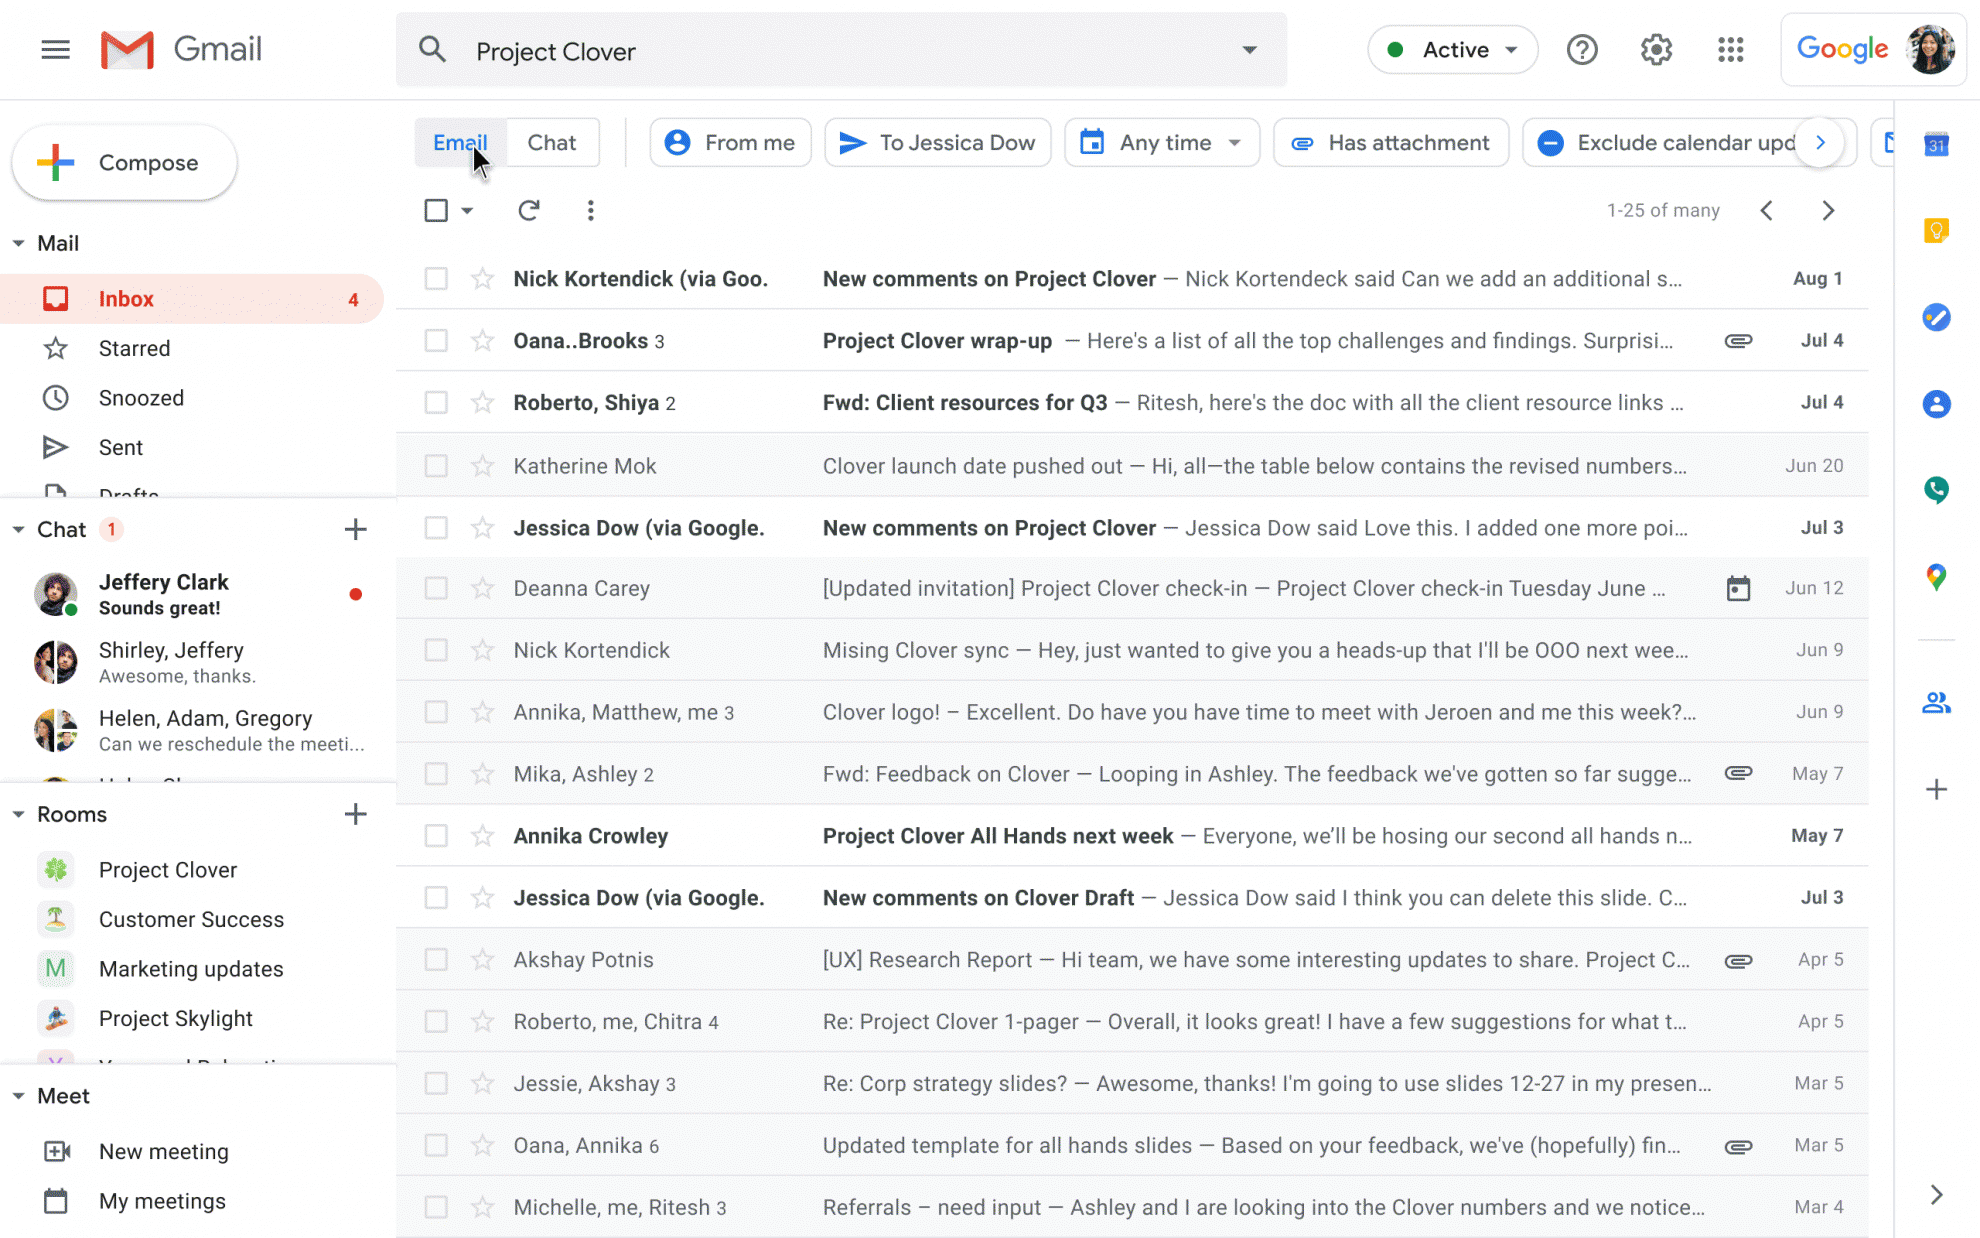 GIF of the new Gmail interface. A cursor is clicking back and forth on the Email and Chat views after searching for "Project Clover"